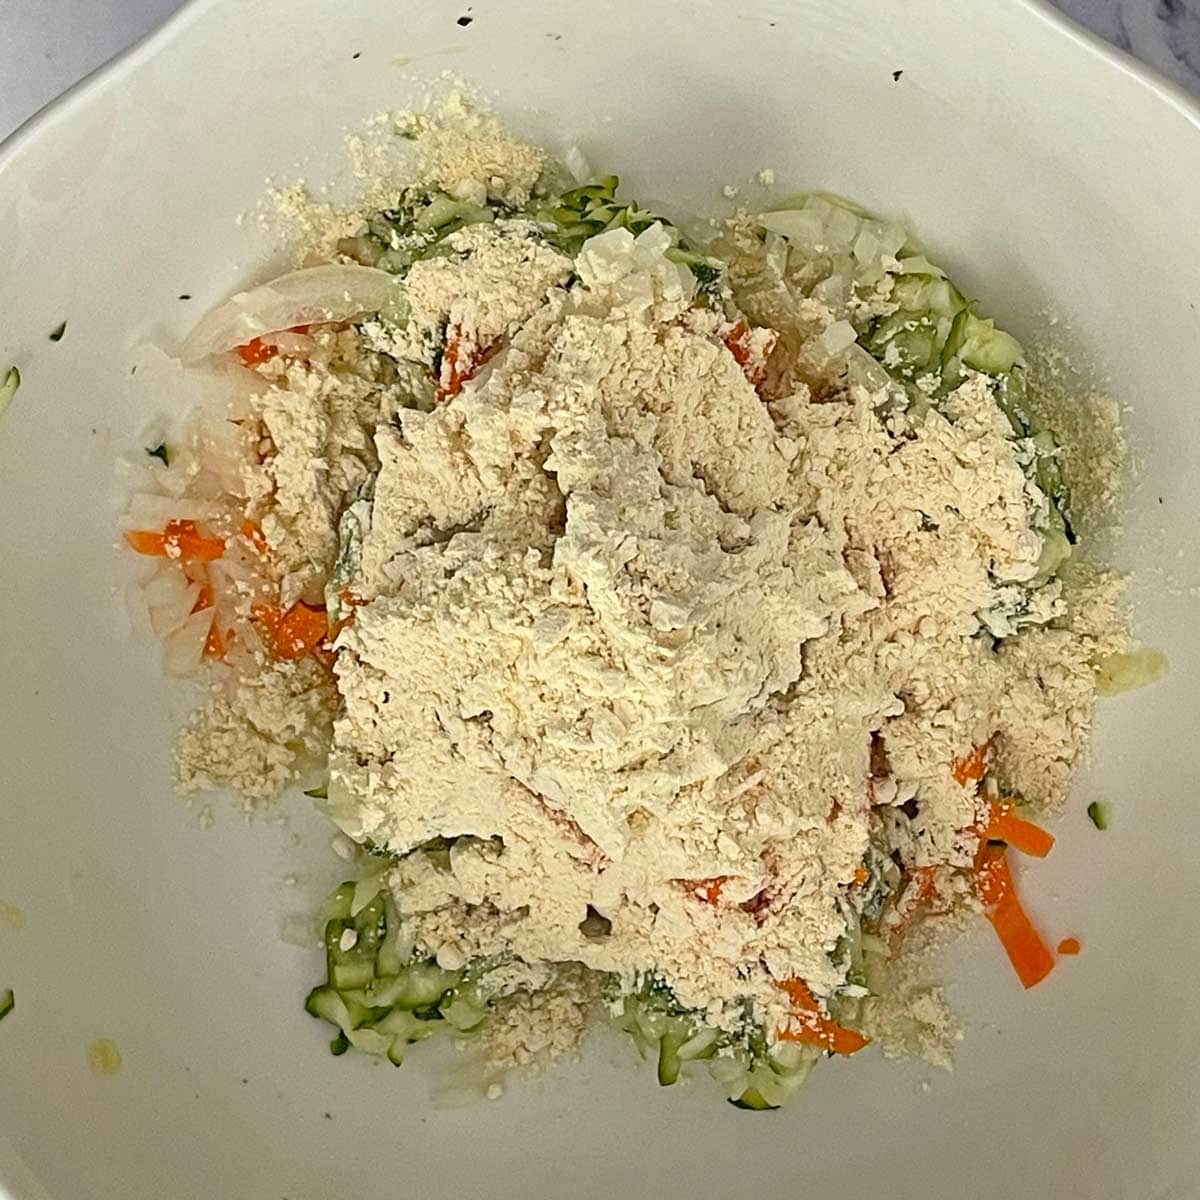 Shredded Zucchini and other ingredients in a bowl.